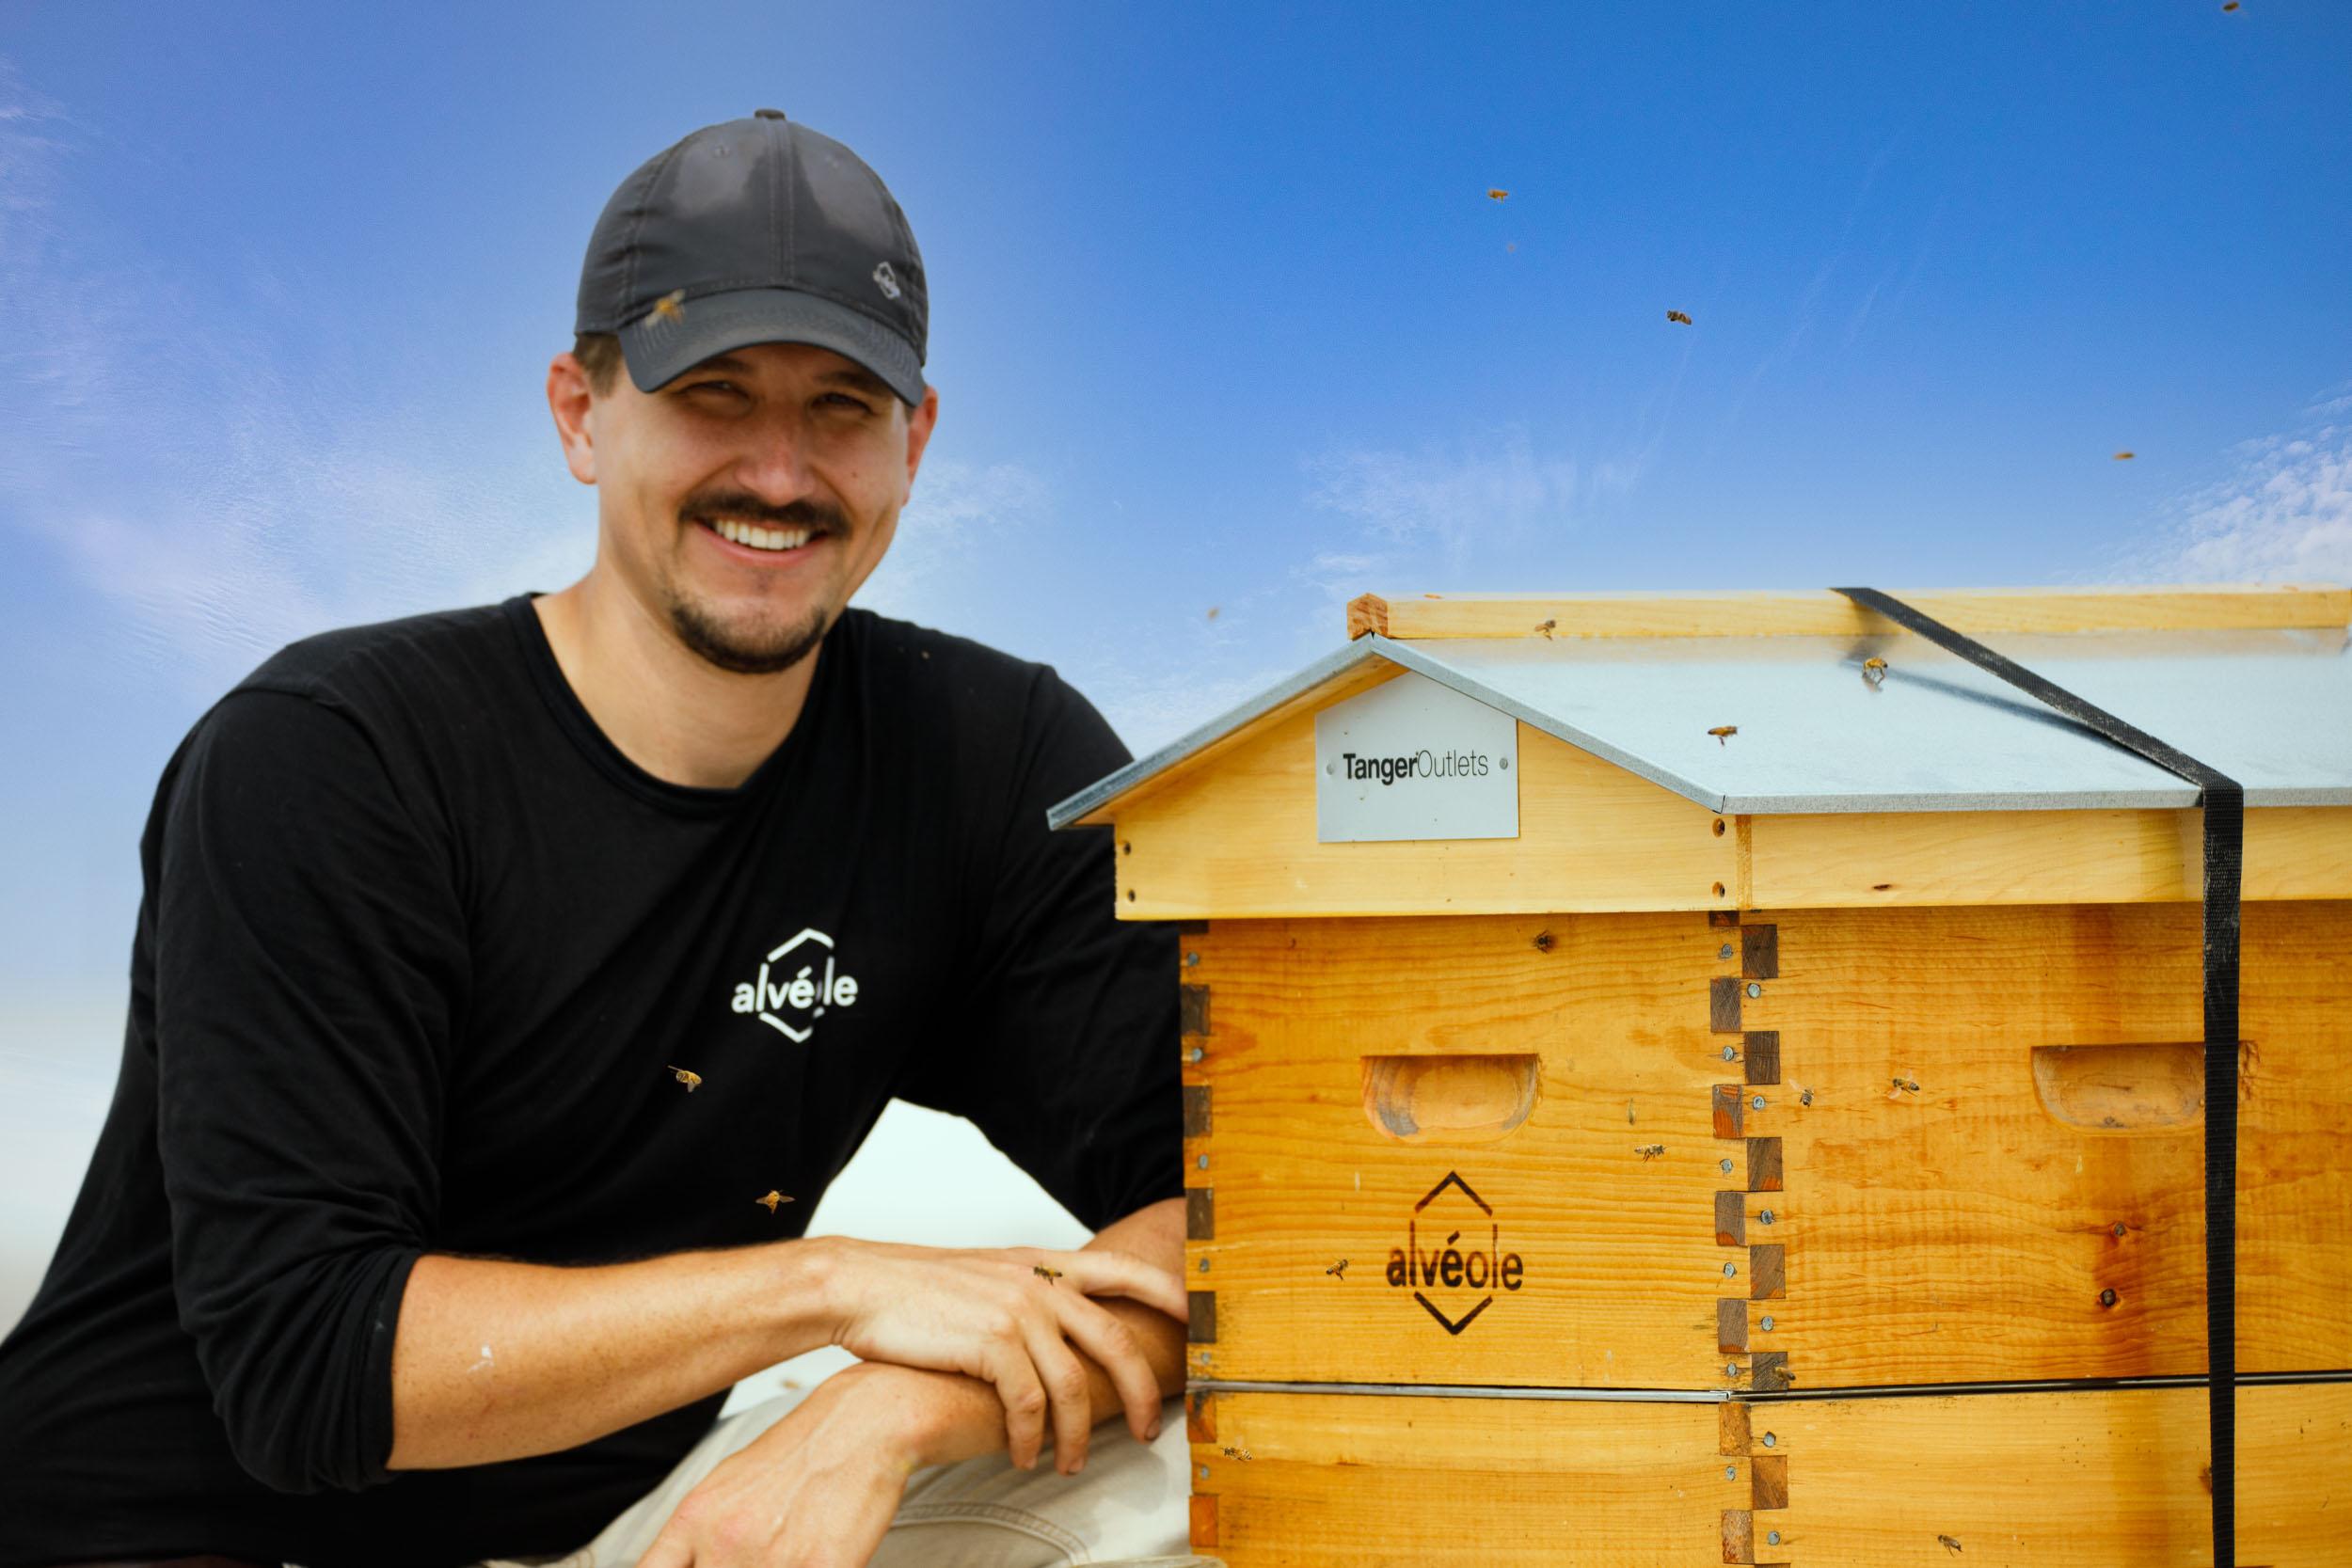 Tanger+Outlets+pollinates+visitors+with+rooftop+beehive+and+beekeeping+program